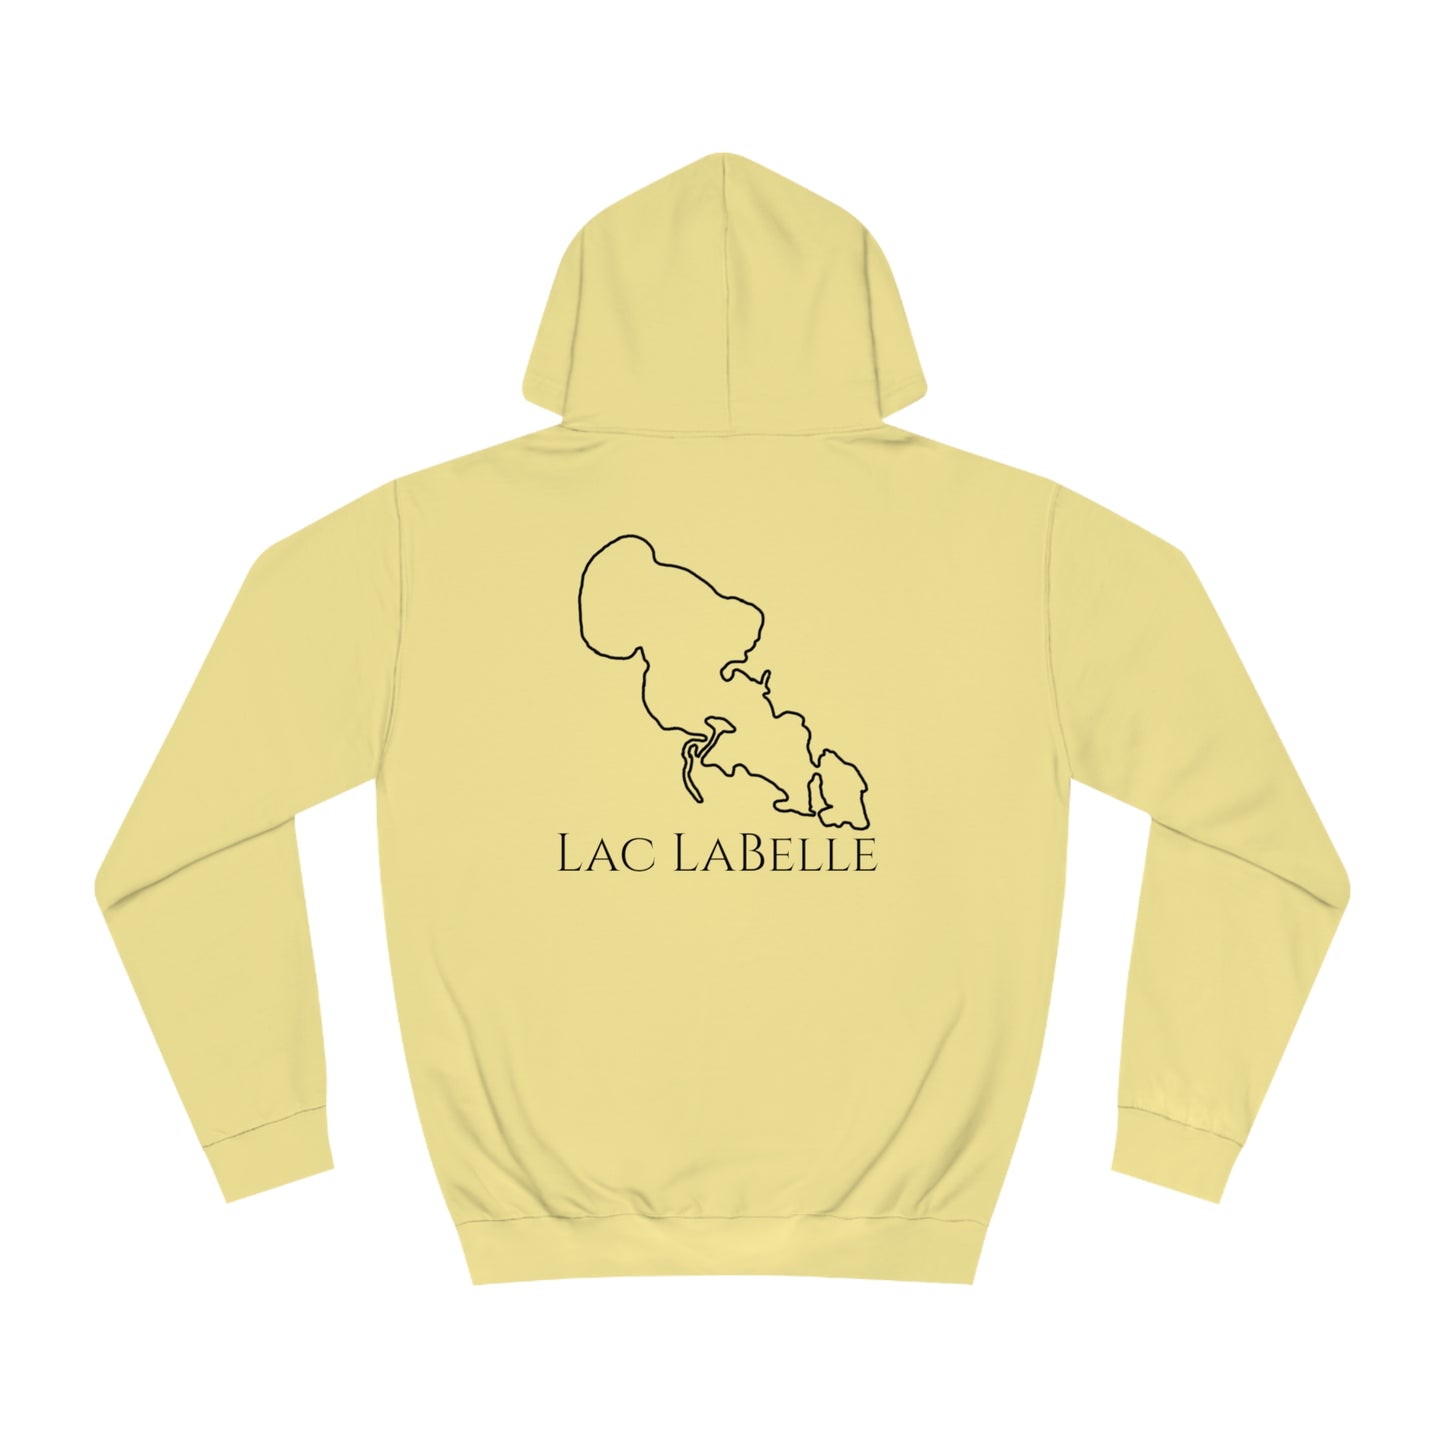 Row Boat Dog Fishing Patch - Lac LaBelle Unisex Hoodie Medium Weight